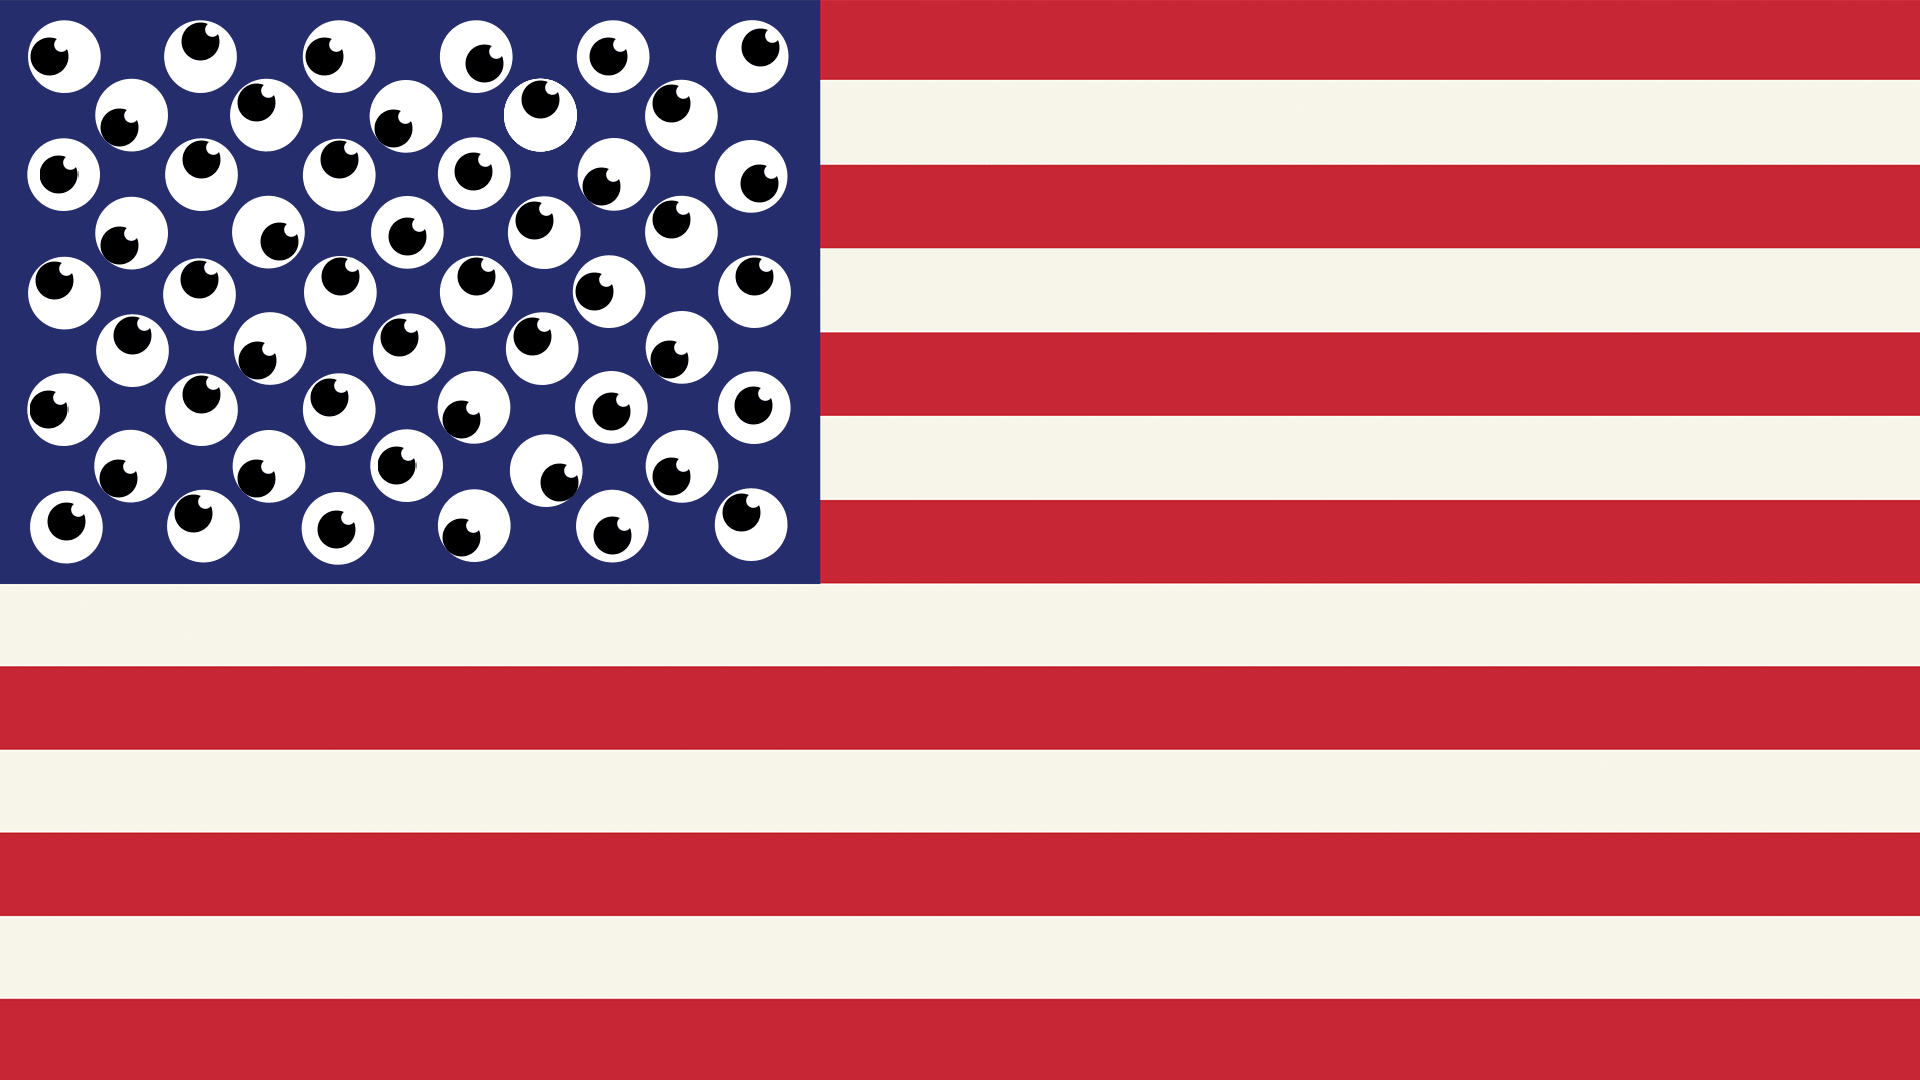 Illustration of an American flag with eyeballs moving instead of stars.